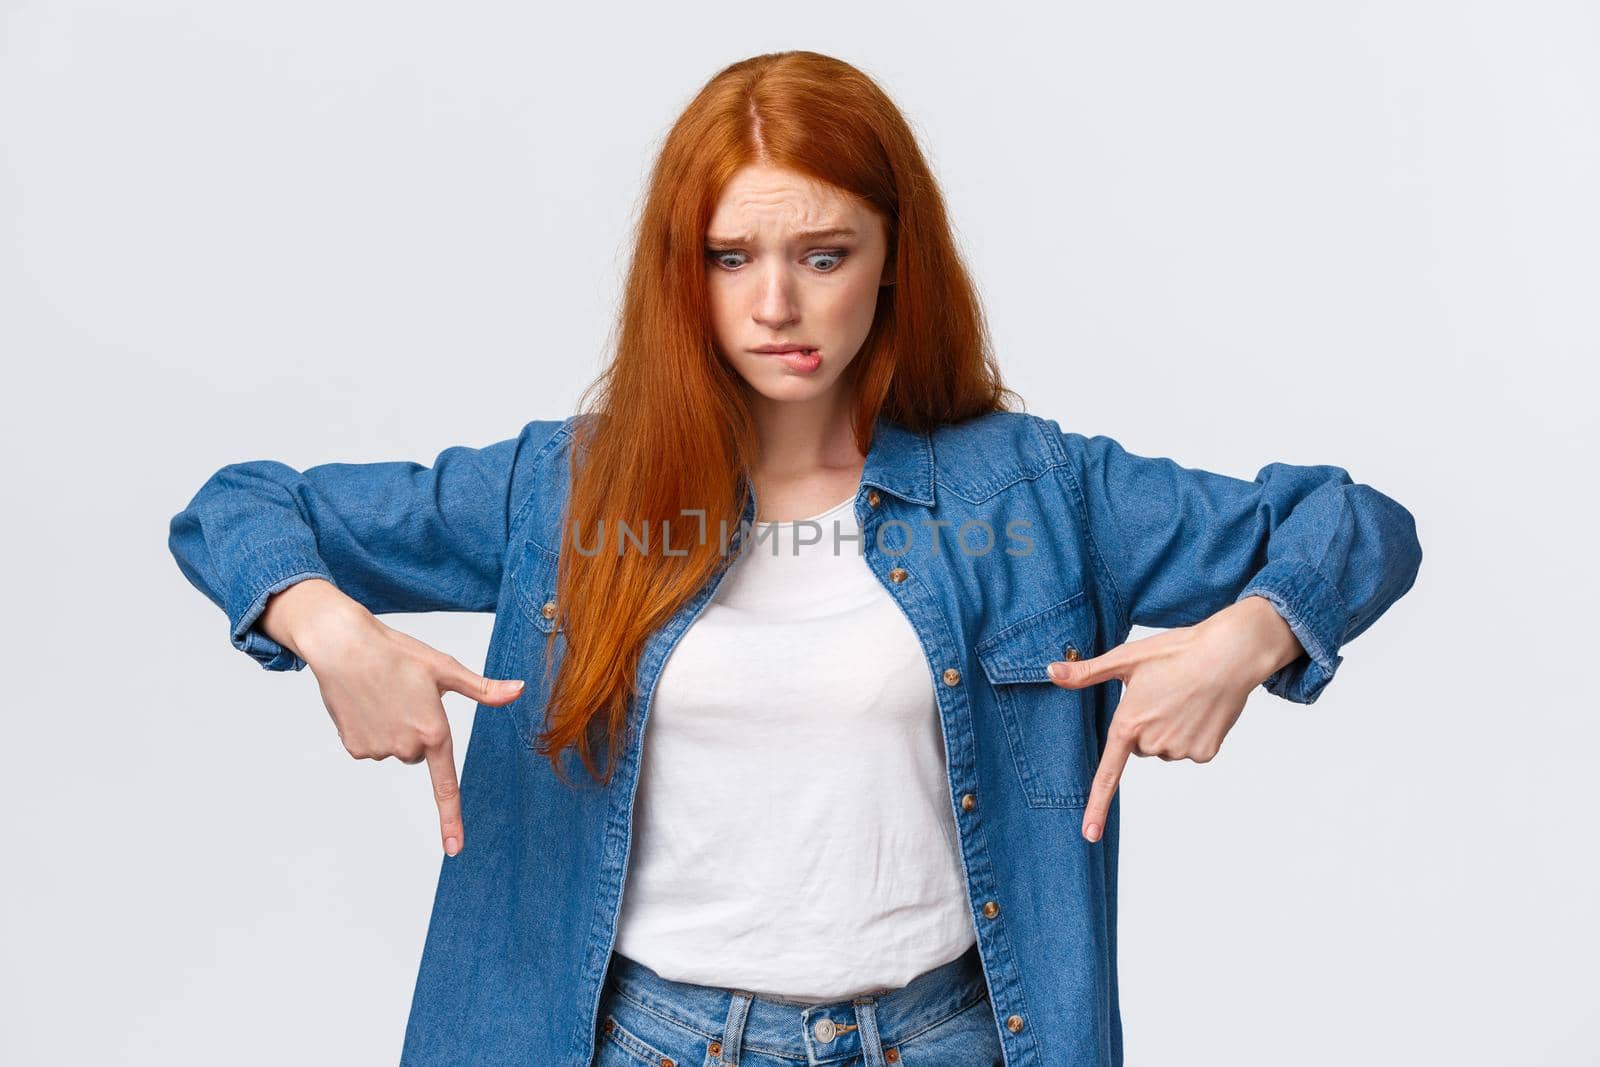 Embarrassed and worried, anxious cute redhead girl dropped something, feeling nervous, biting lip and staring gloomy down, pointing bottom advertisement, standing white background.